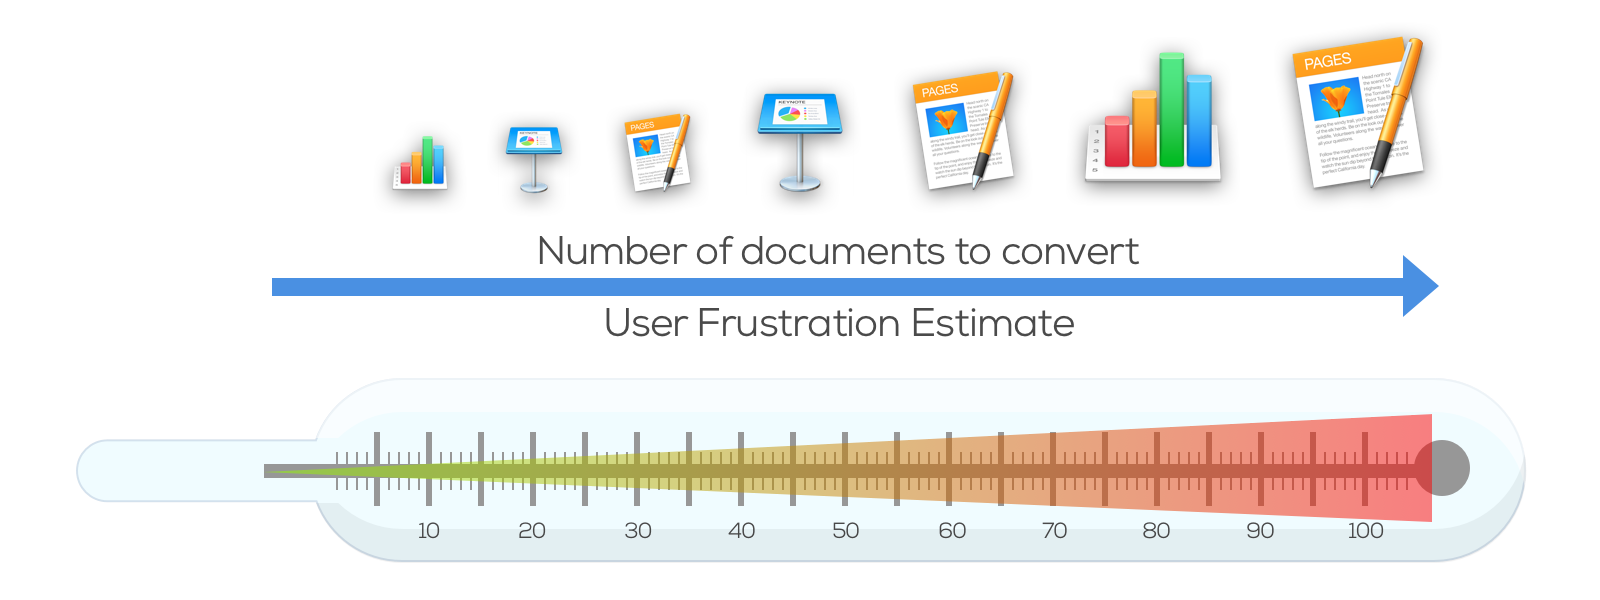 The higher the number of documents the higher is user frustration when converting documents